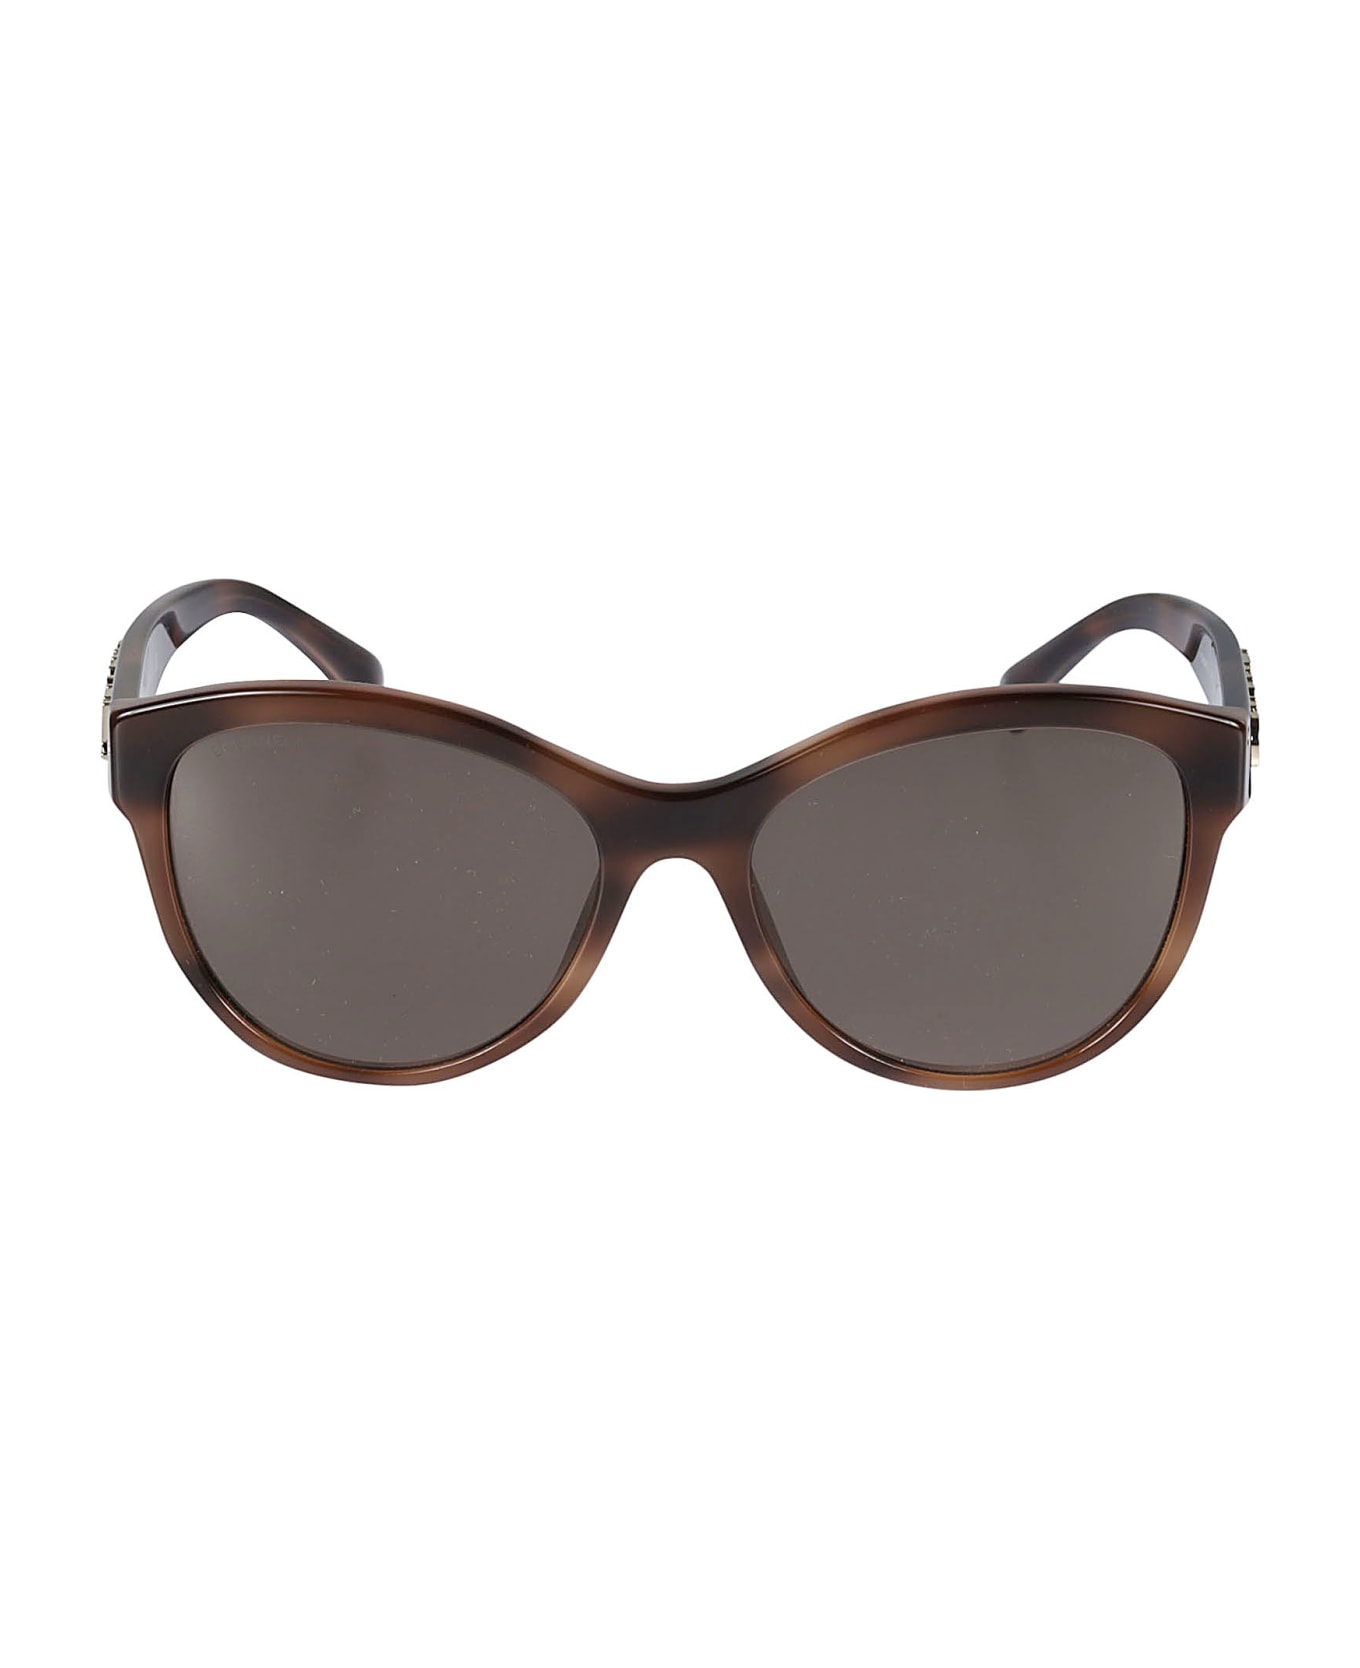 Chanel Butterfly Acetate Sunglasses - 1661/3